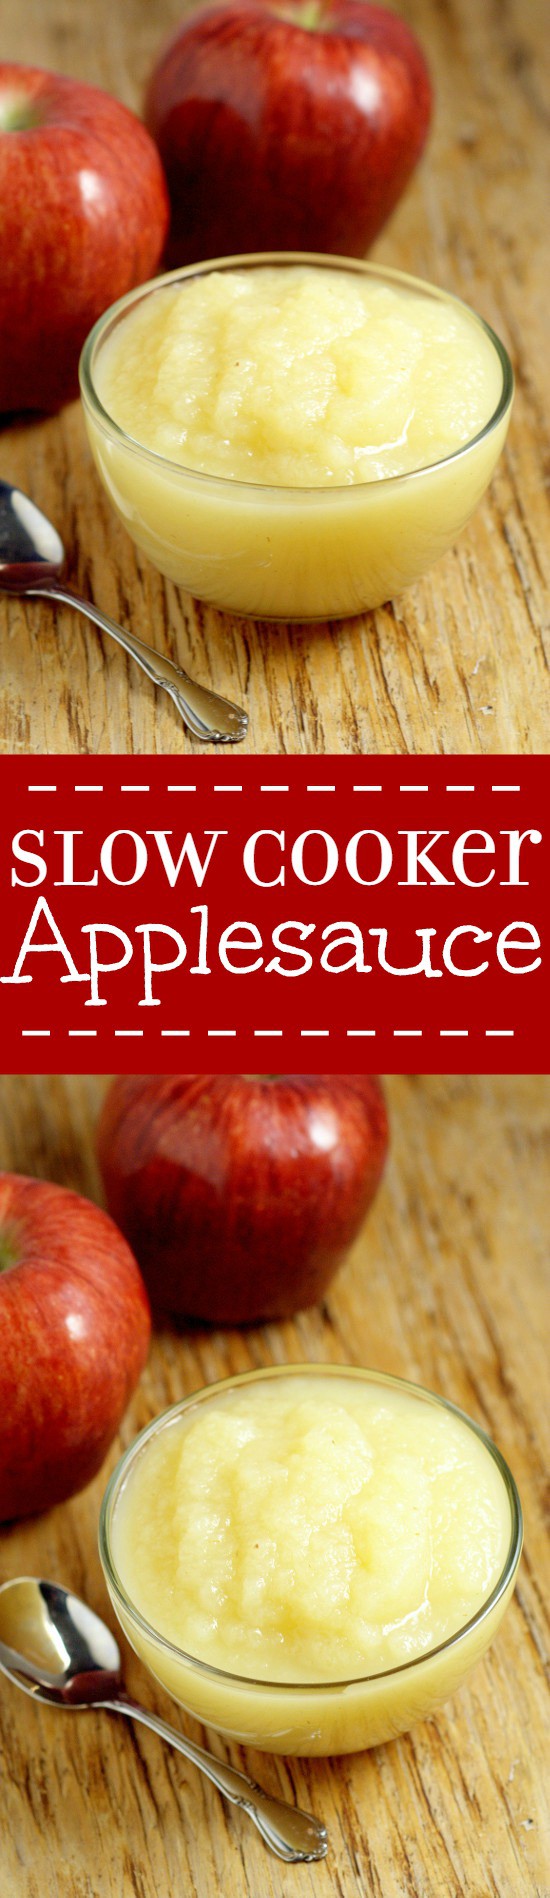 Making your own Slow Cooker Applesauce couldn't be easier with just ONE ingredient!  A healthy and delicious snack recipe for kids that's easy to make, right in your Crockpot! Freezer friendly too! Perfect! Love that you know EXACTLY what's in it!